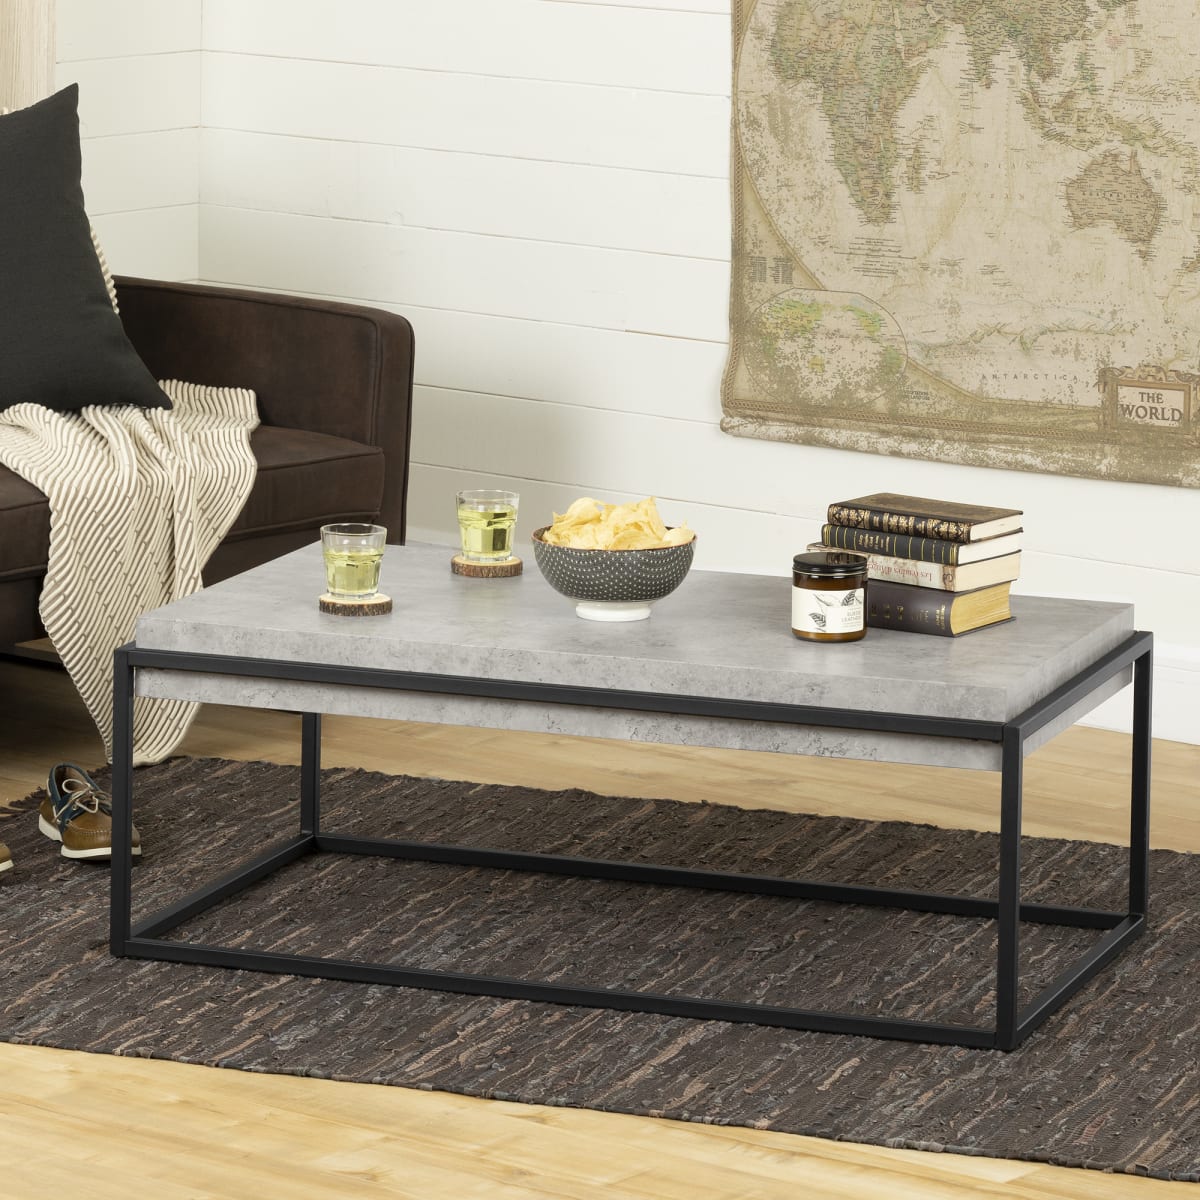 10. South Shore Mezzy Industrial Coffee Table 